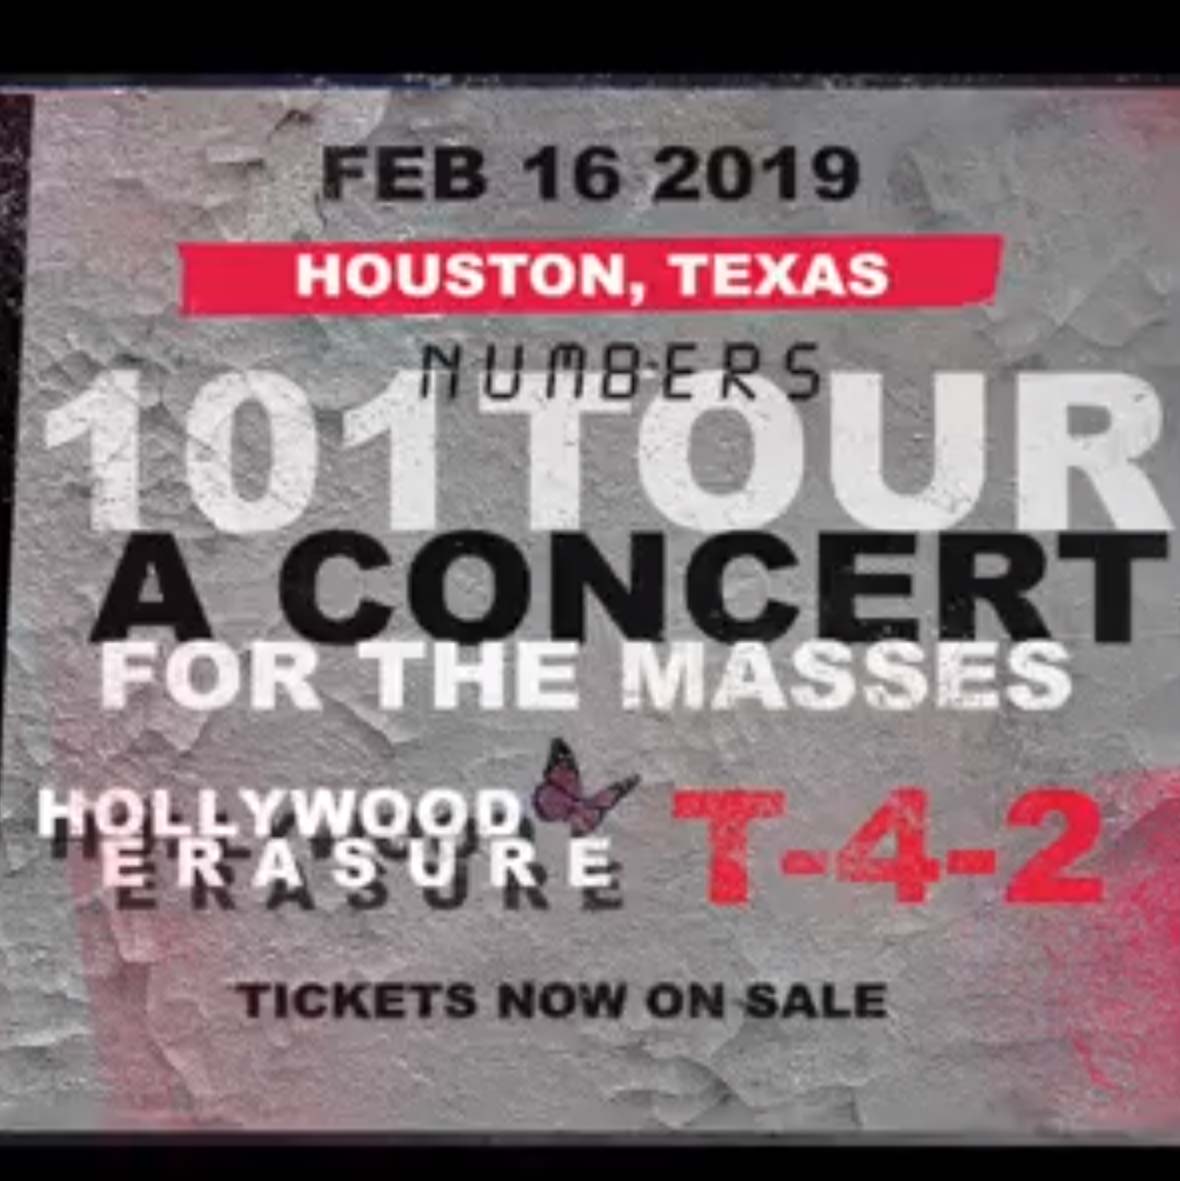 T-4-2 Live in Houston, Texas – February 16, 2019 with Devotional and Hollywood Erasure.